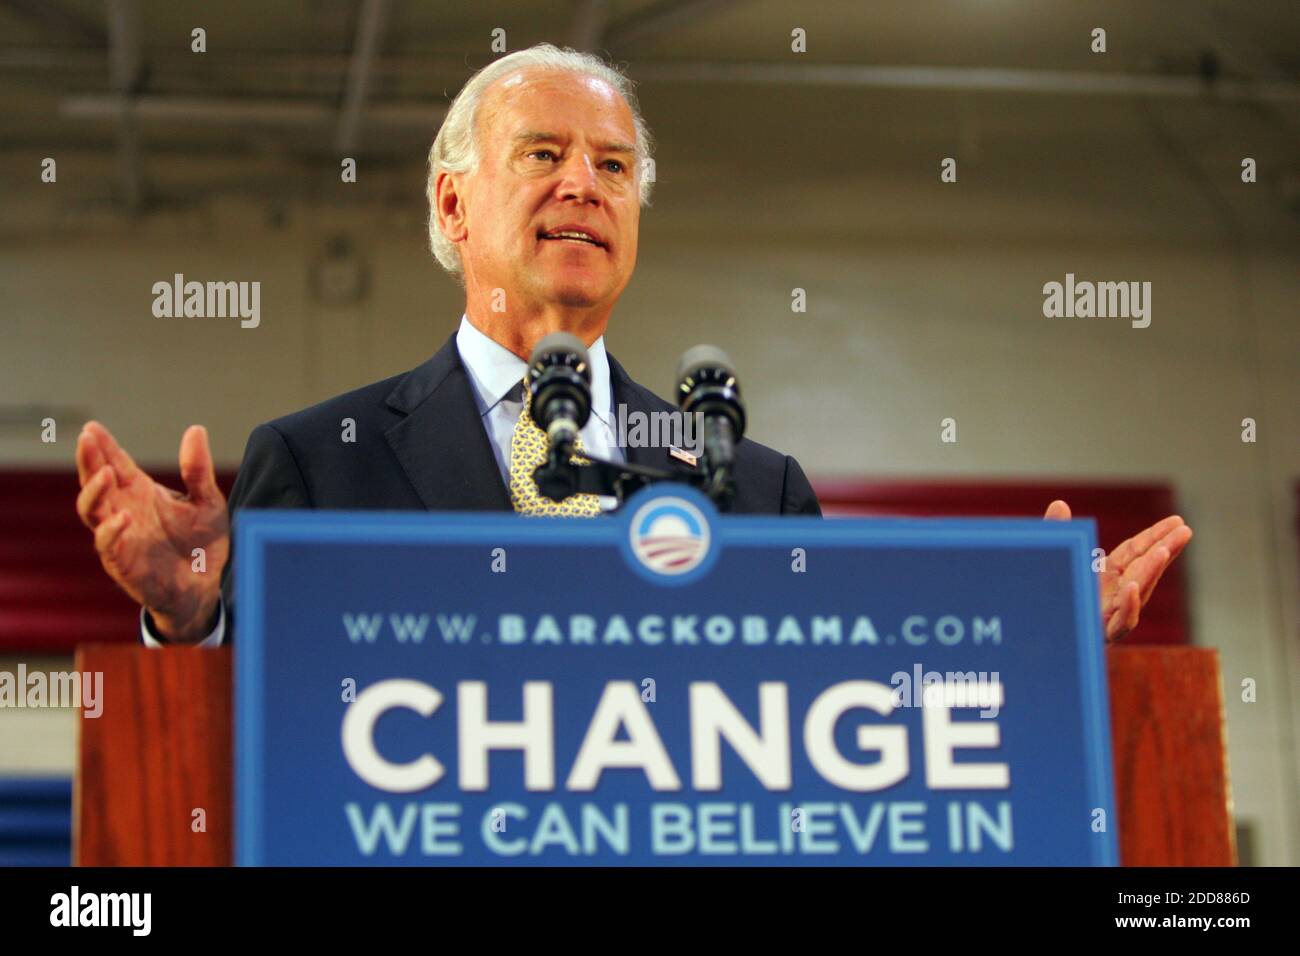 NO FILM, NO VIDEO, NO TV, NO DOCUMENTARY - Democratic vice-presidential nominee Joe Biden speaks to a crowd gathered at the Maple Point Middle School in Langhorne, PA, USA, on Friday, September 5, 2008. Photo by David Swanson/Philadelphia Inquirer/MCT/ABACAPRESS.COM Stock Photo